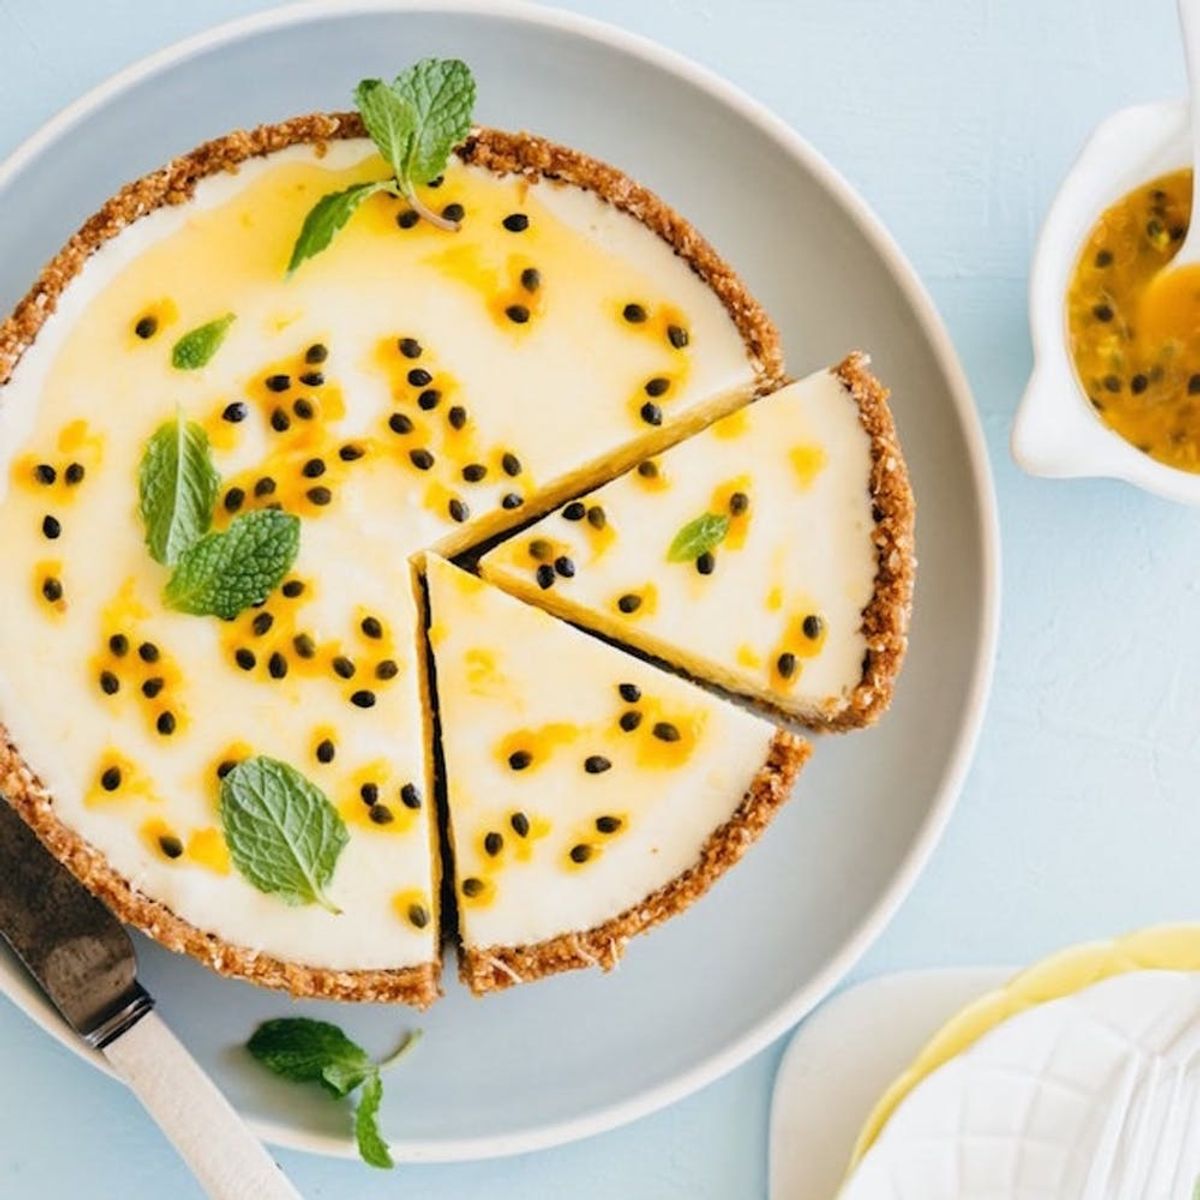 15 Passion Fruit Dessert Recipes Perfect for Your Spring Date Night